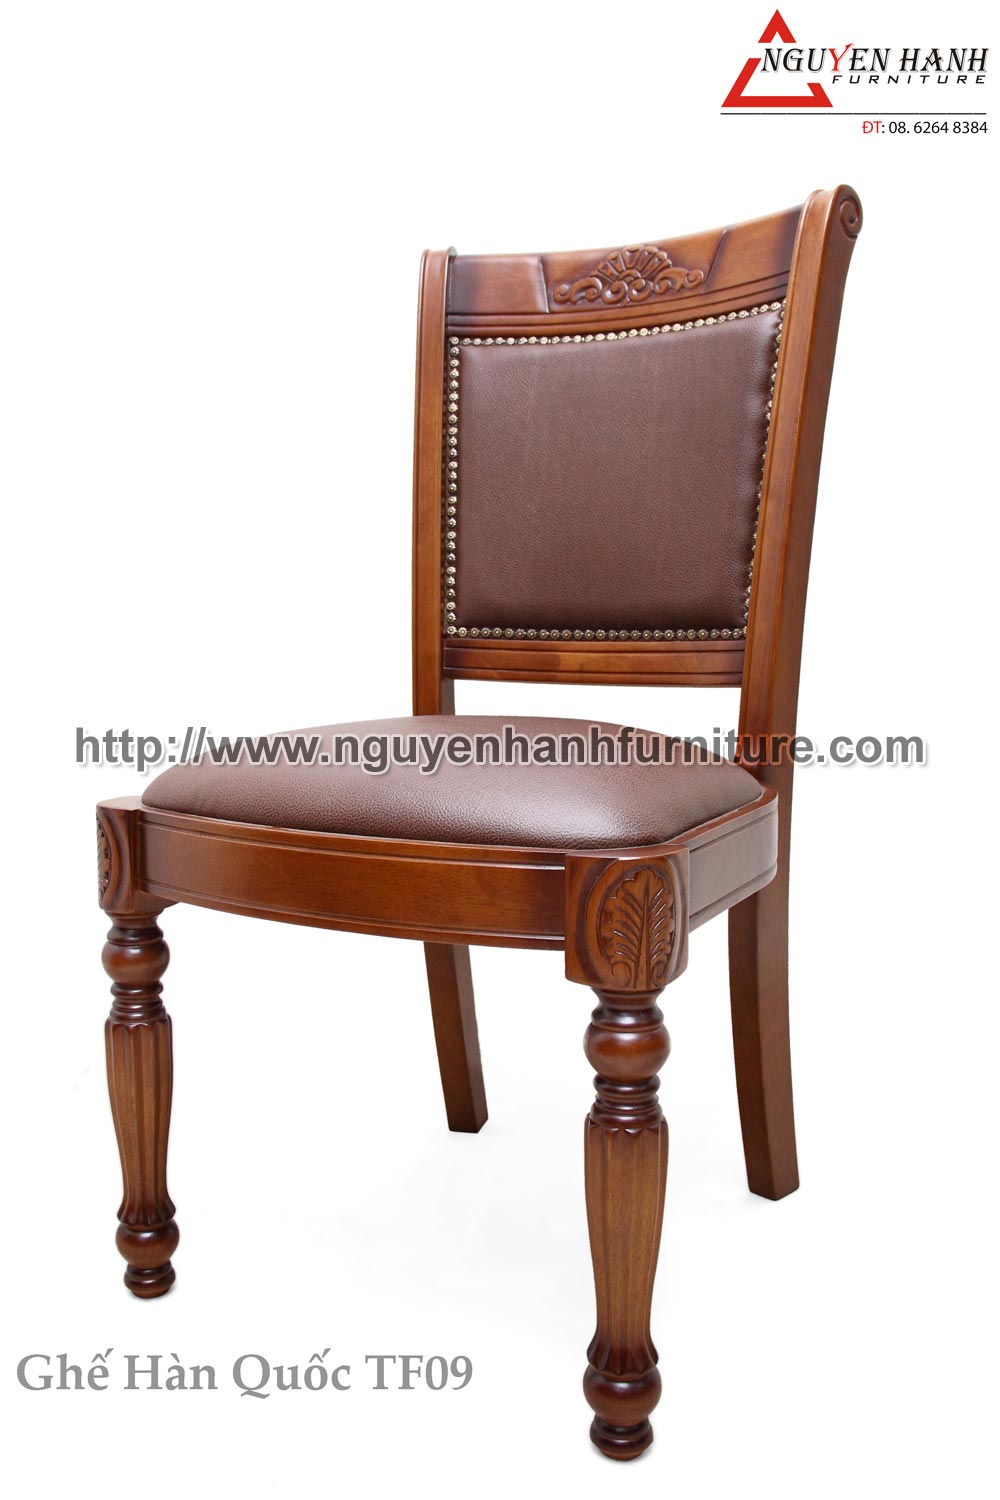 Name product: TF09 chair- Dimensions:  - Description: Rubber wood, the mattress